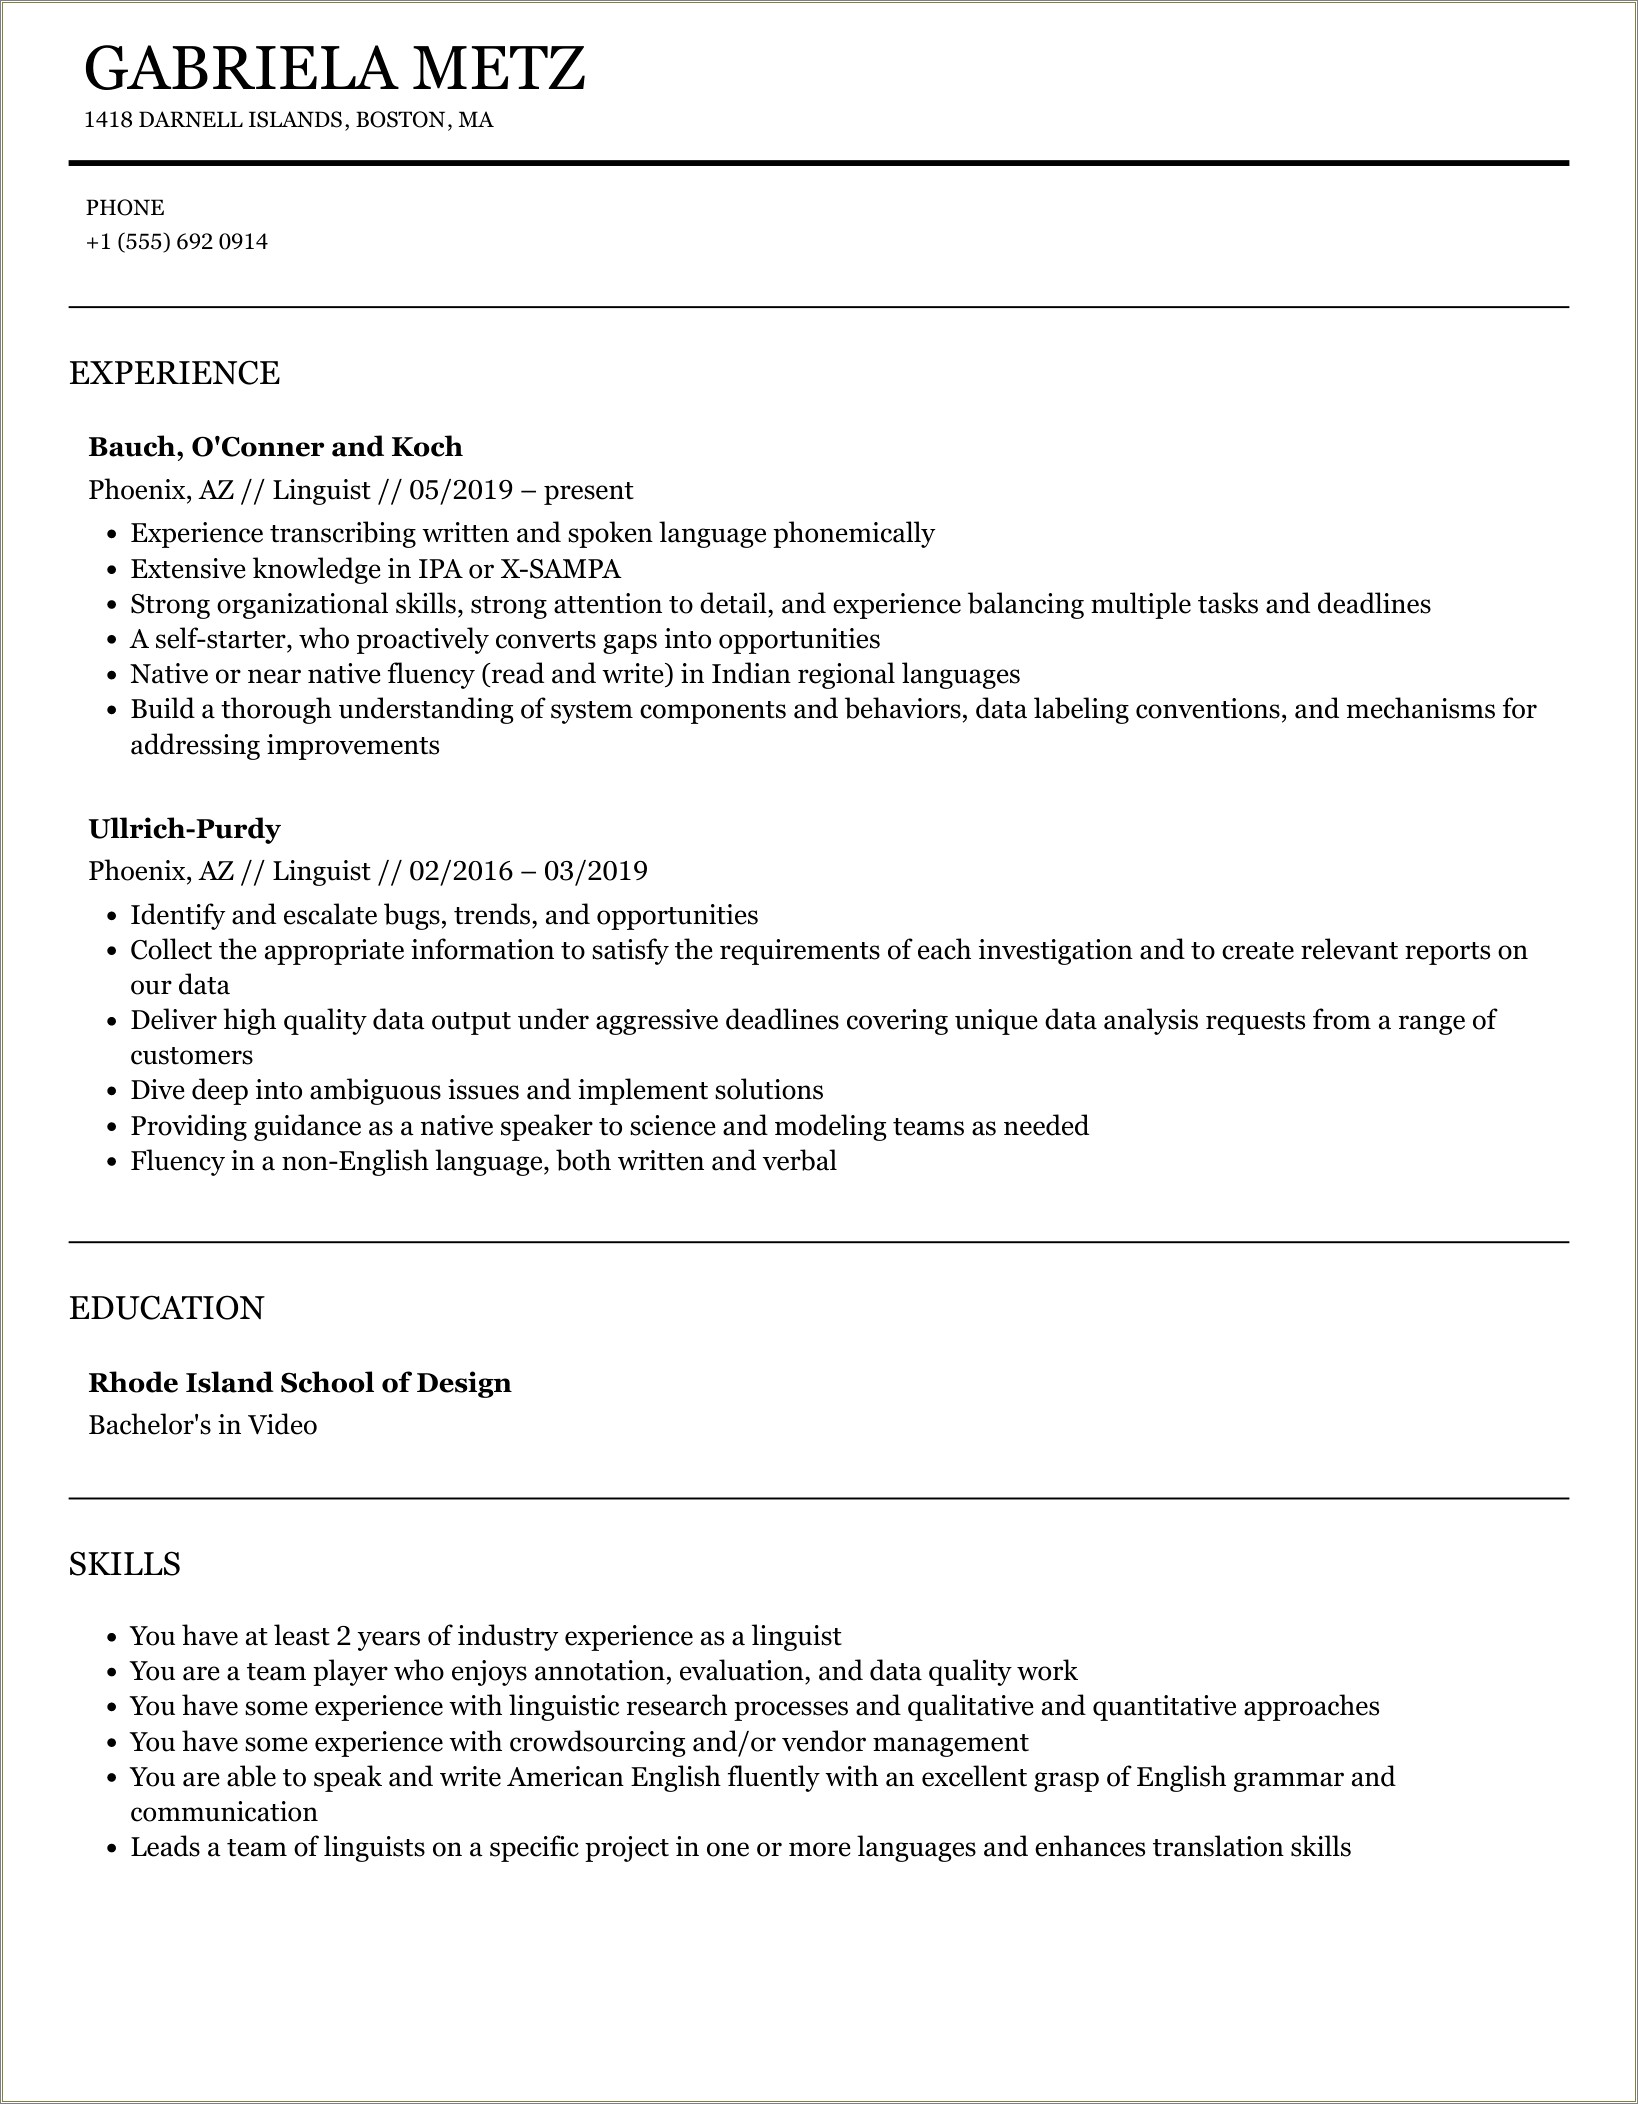 Resume Work At Calnet As Linguist Role Player